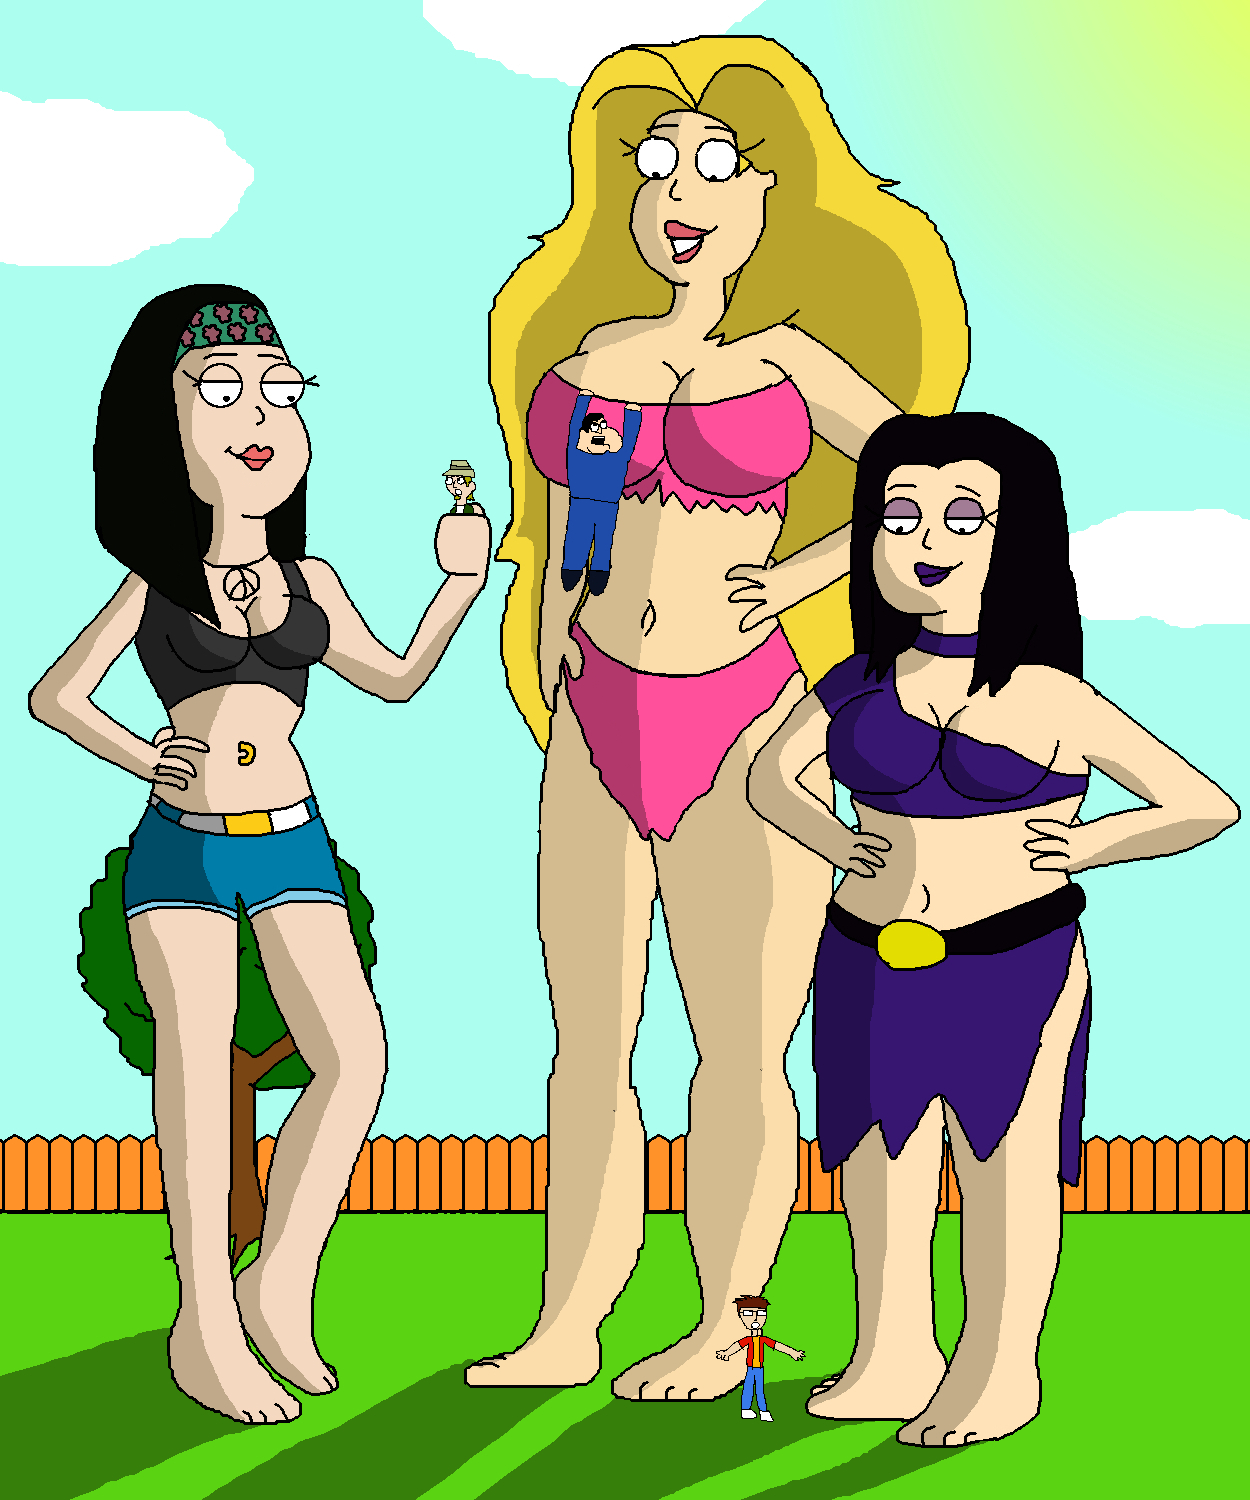 American dad kylie jenner